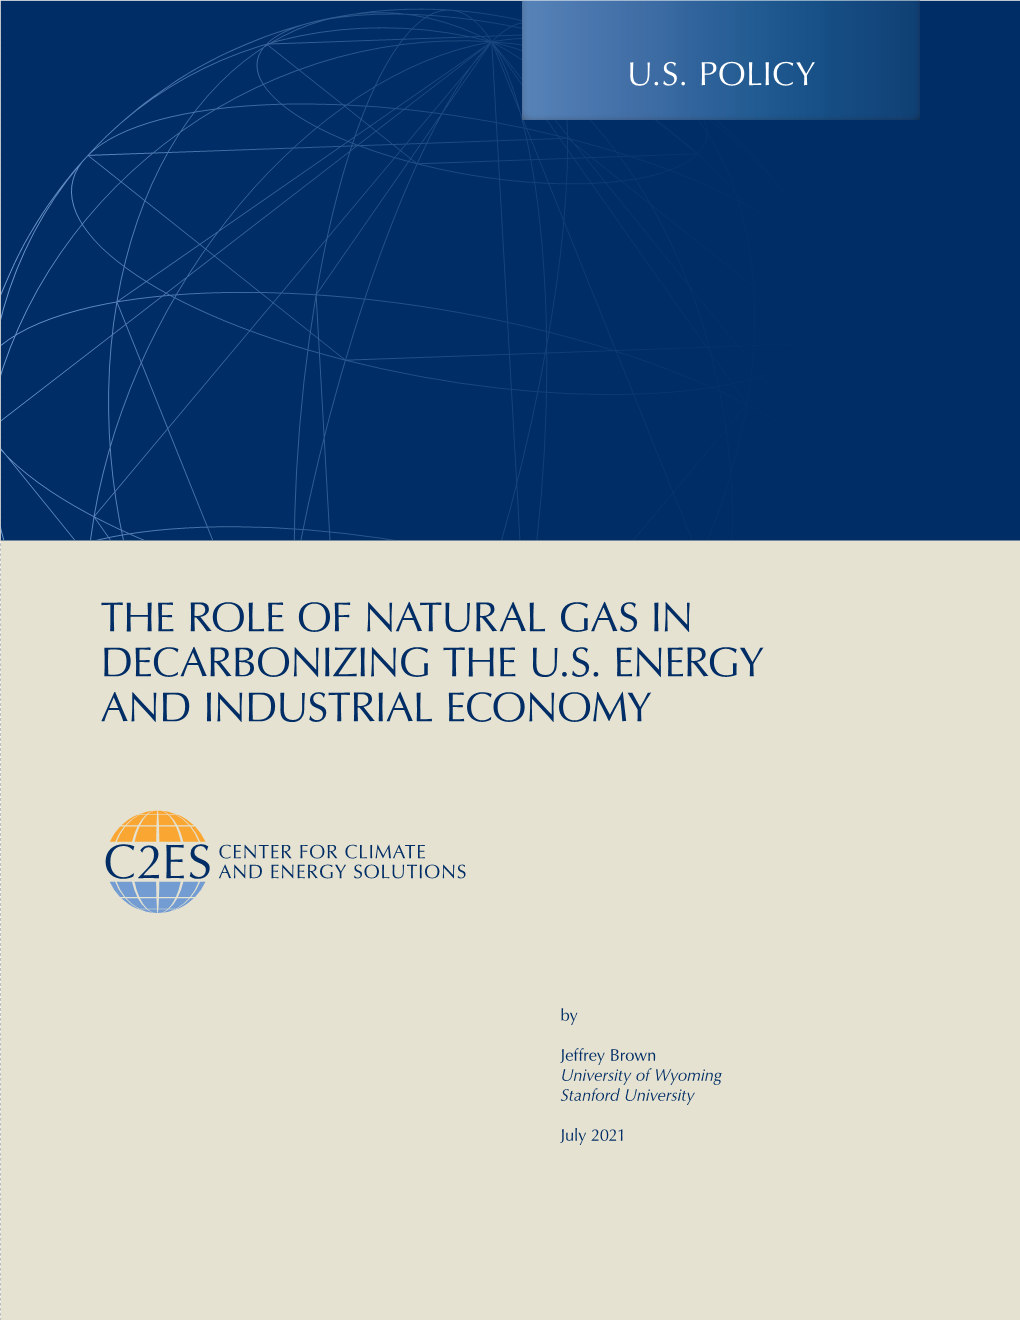 The Role of Natural Gas in Decarbonizing the U.S. Energy and Industrial Economy